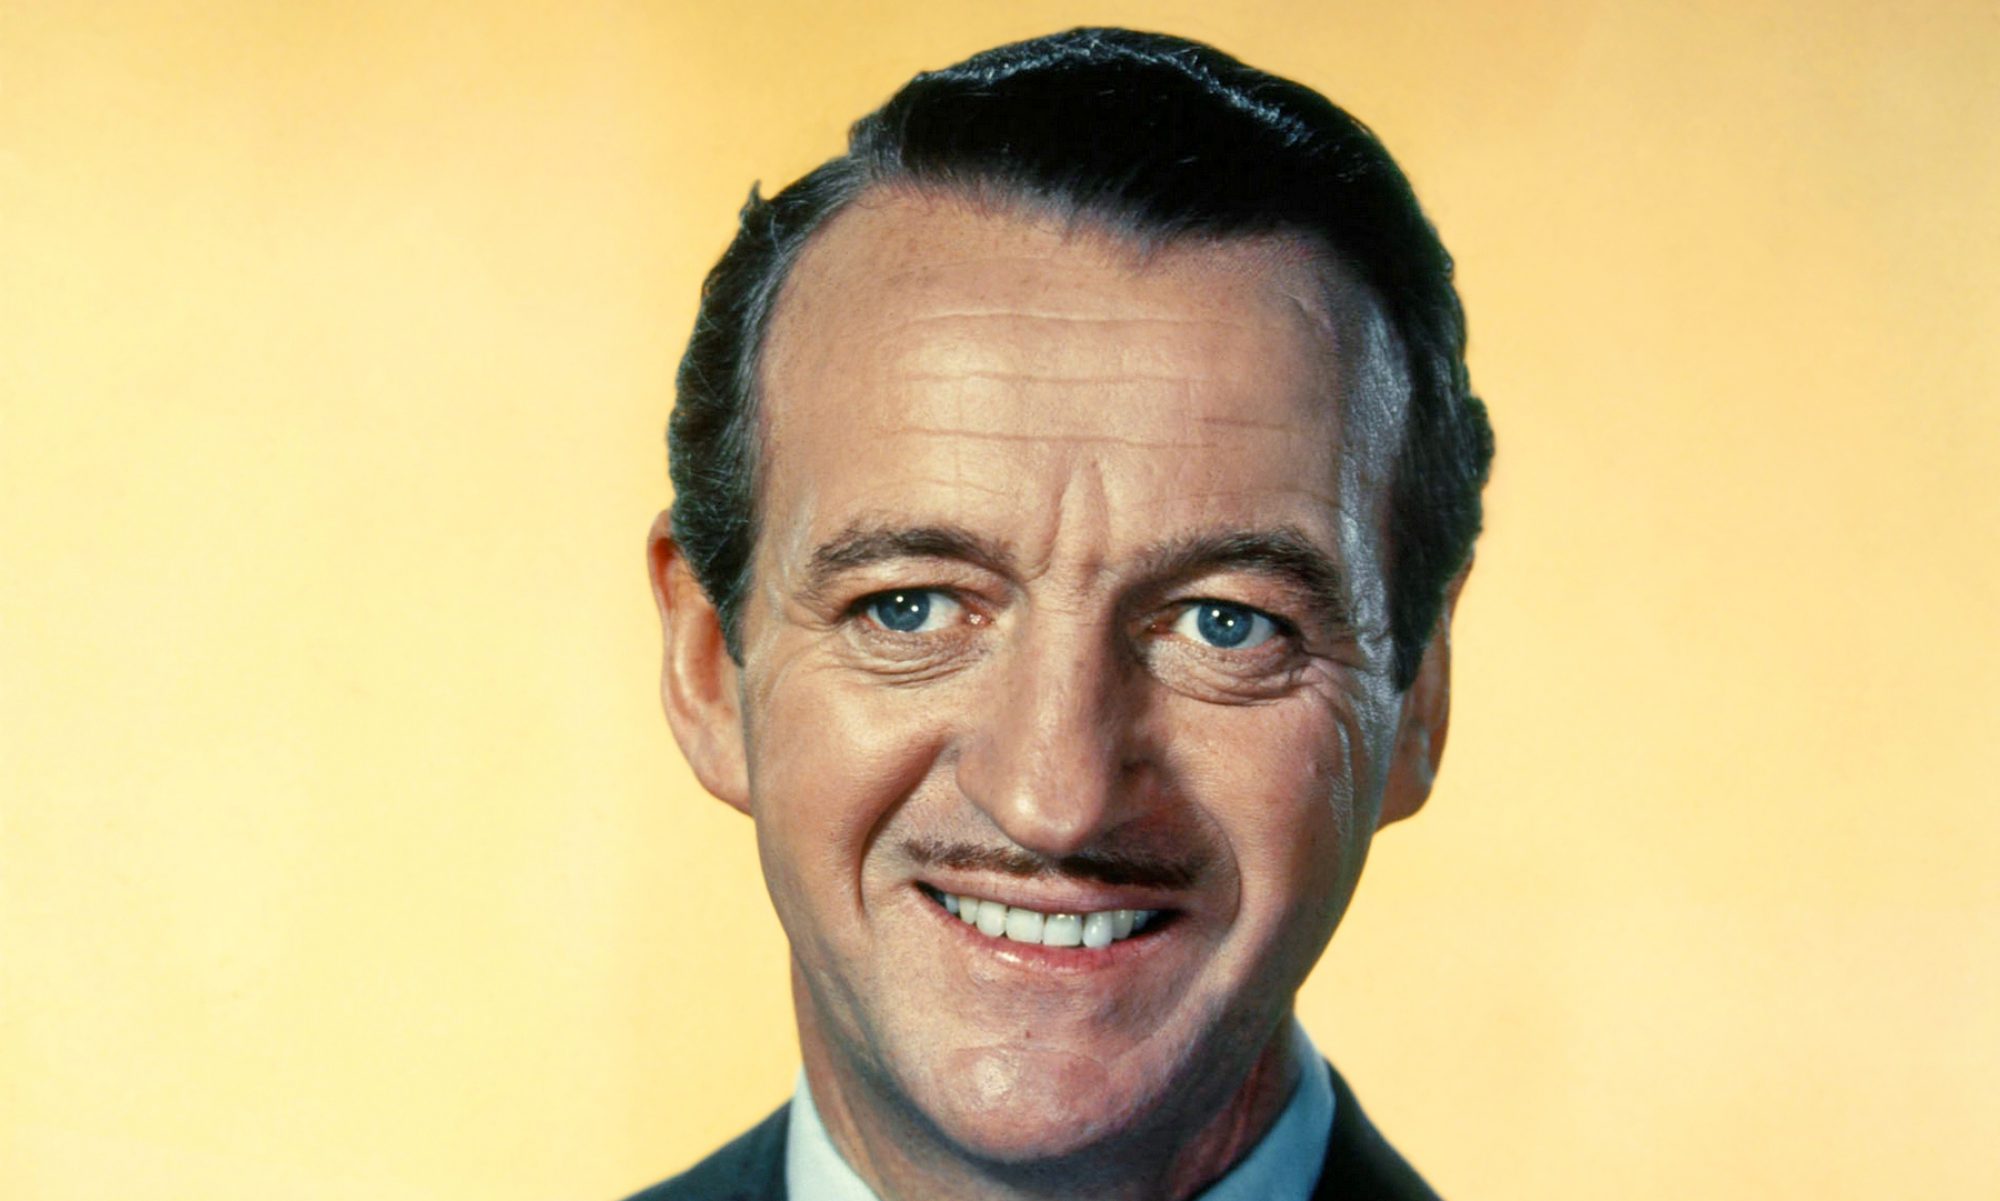 http://www.cmgww.com/stars/niven/wp-content/uploads/2017/04/cropped-5737c50bcbcd8__david-niven-10-1.jpg